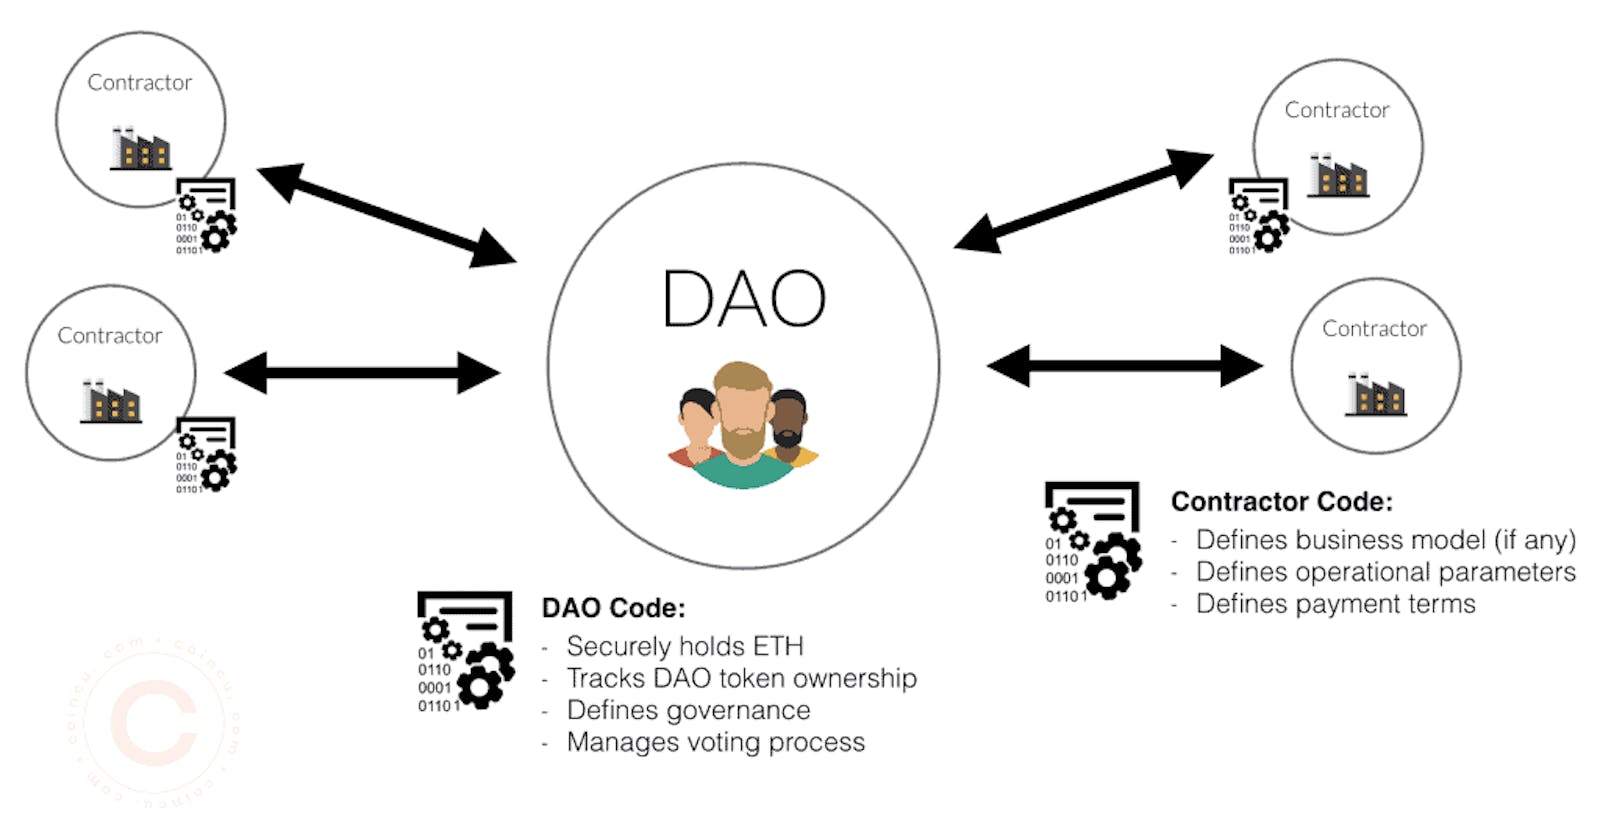 Decentralized Organizations of the Future: An in-depth look at Decentralized Autonomous Organizations (DAOs)